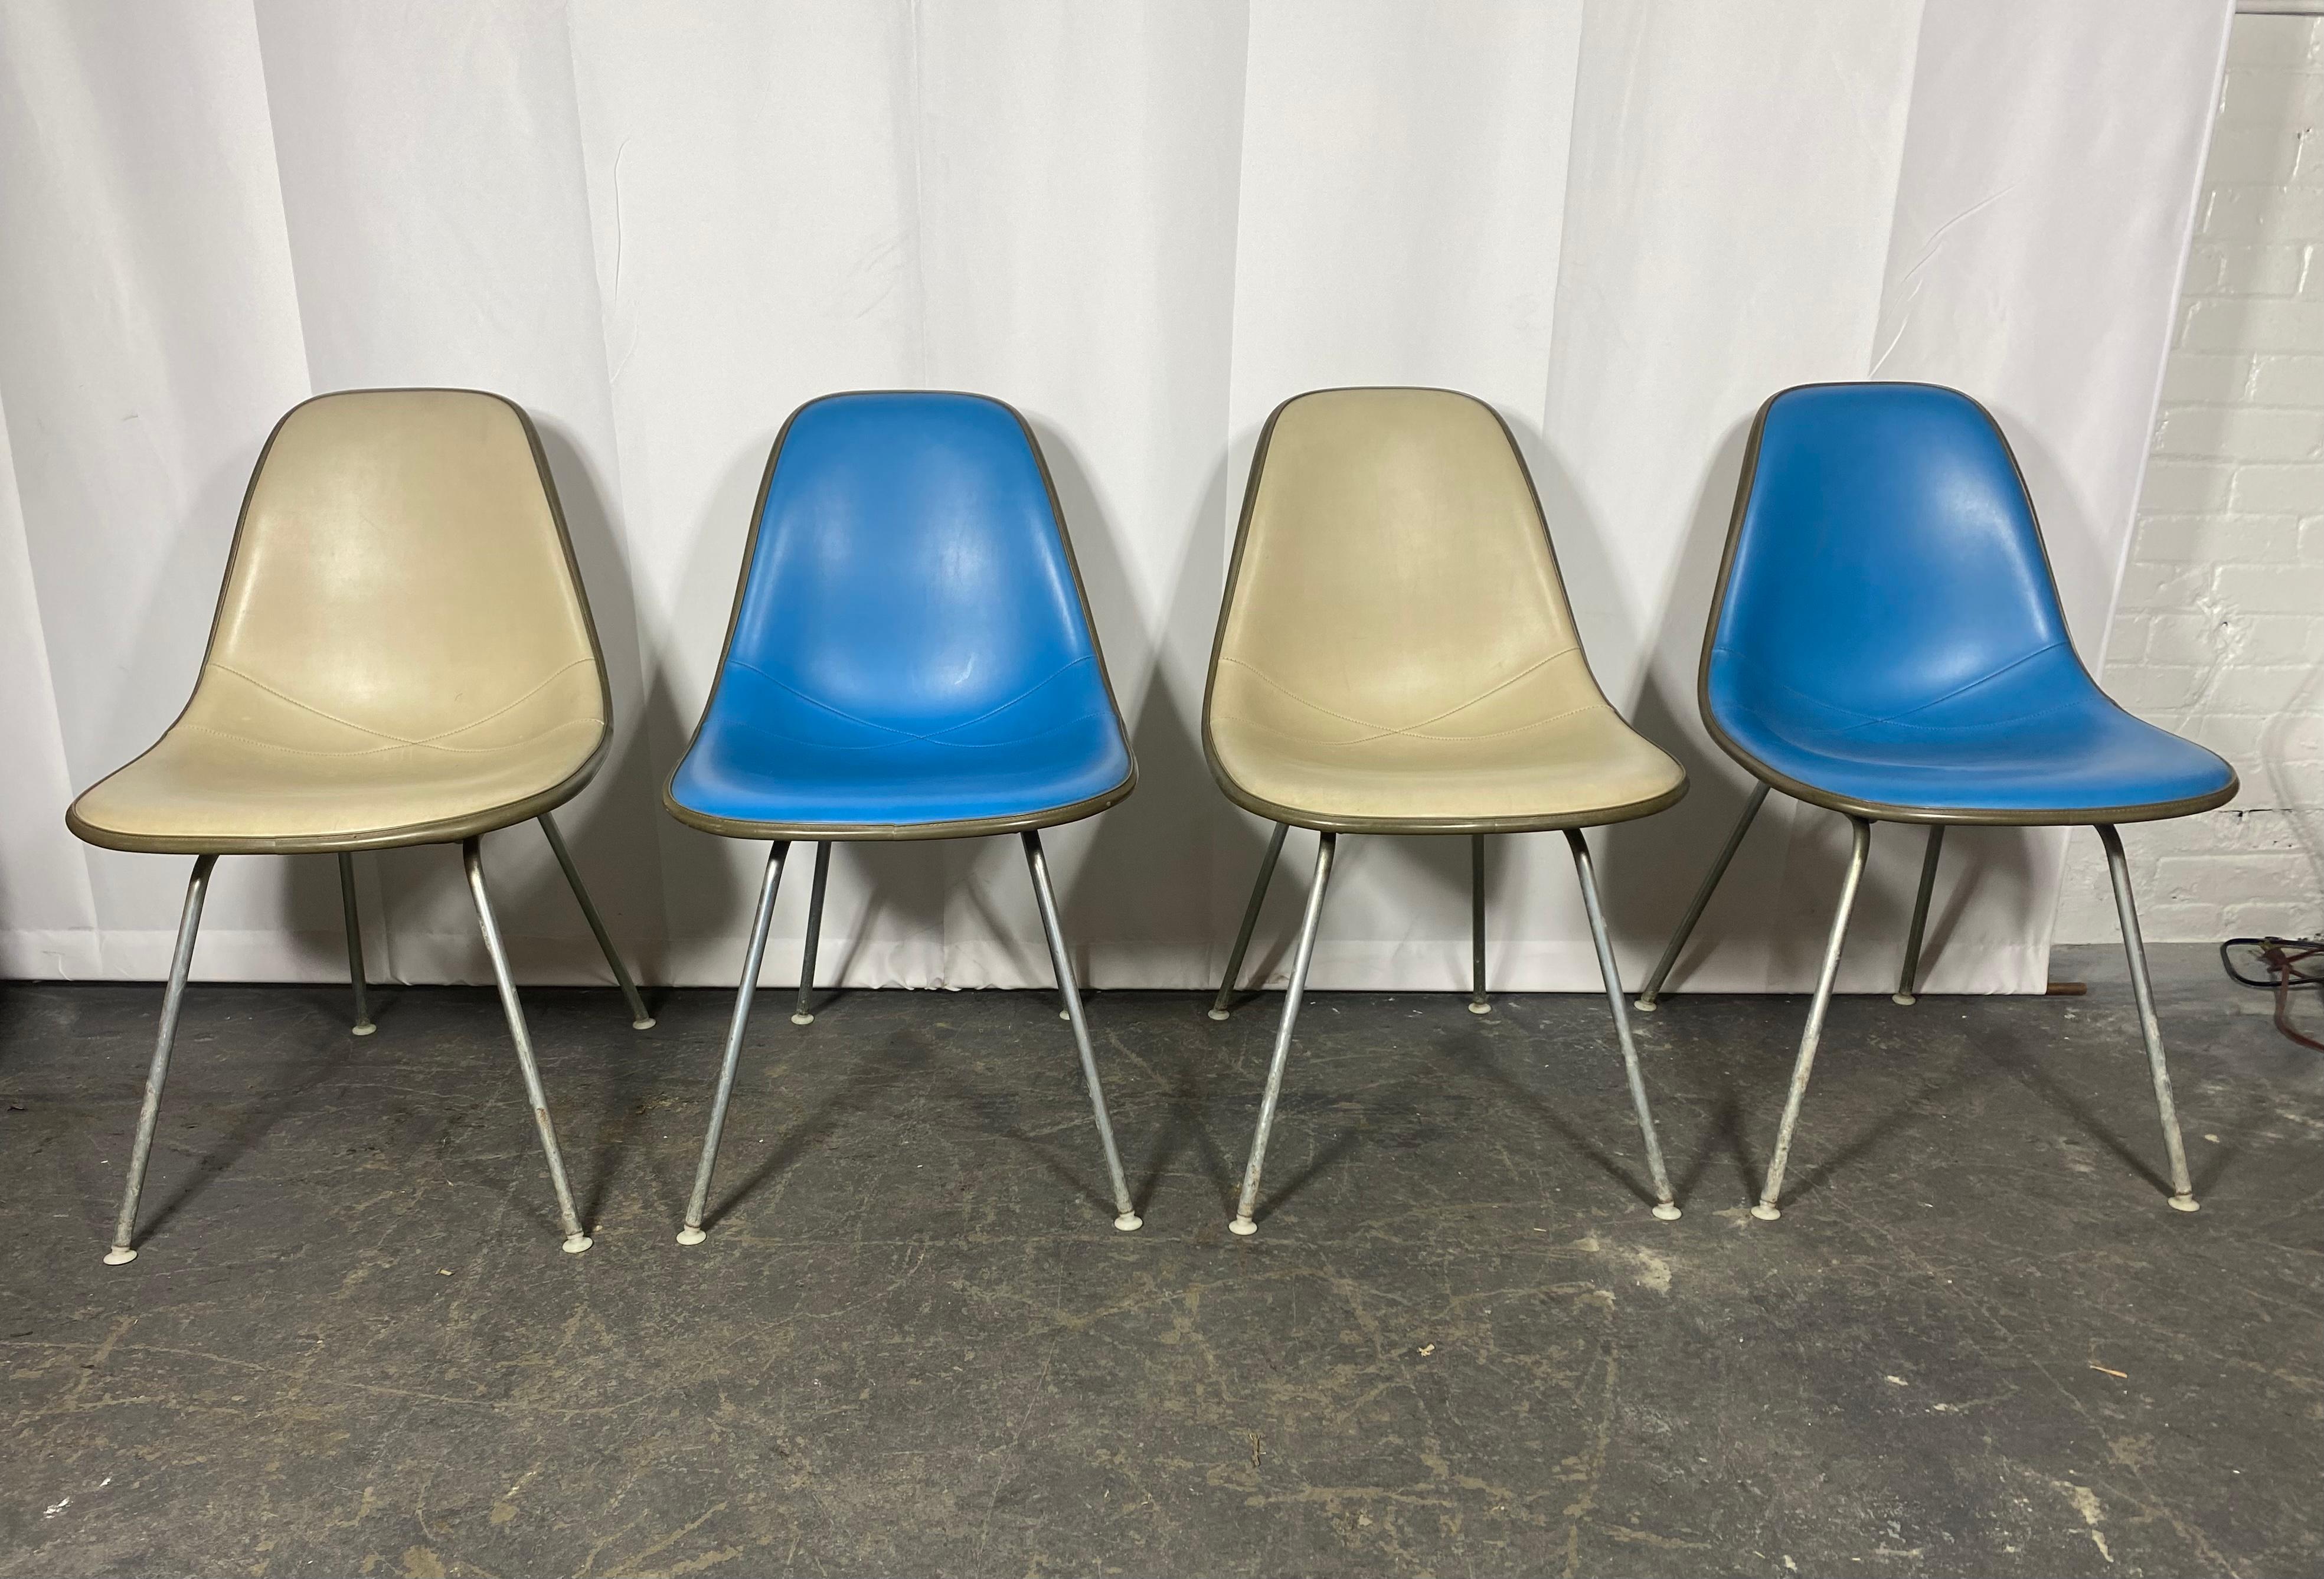 Iconic Seating: Ray and Charles Eames Padded Chair for Herman Miller.. Priced PER chair..

Own a piece of design history with this iconic mid-century modern chair, designed by legendary duo Ray and Charles Eames for renowned furniture manufacturer